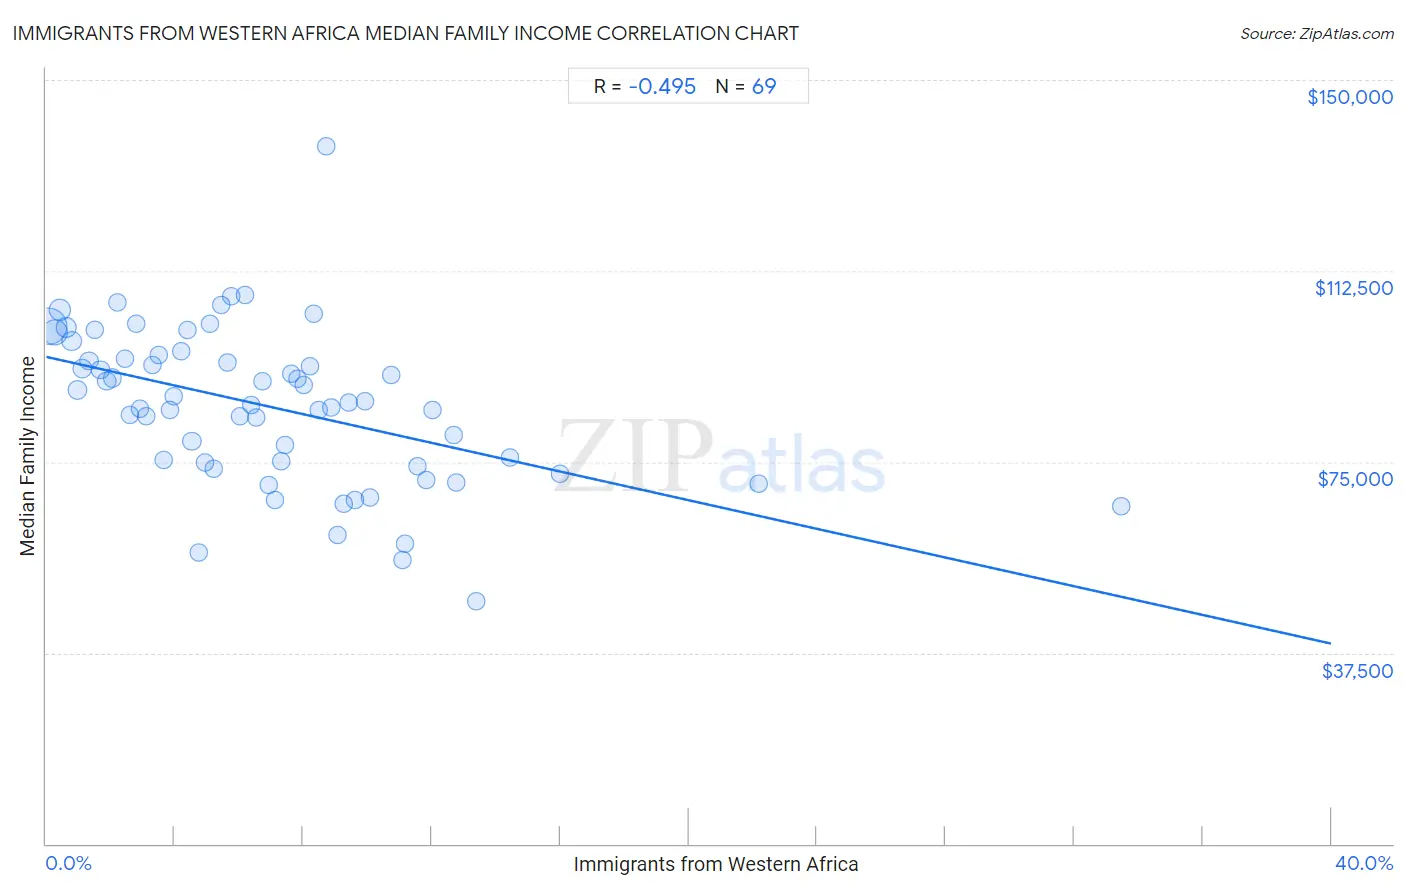 Immigrants from Western Africa Median Family Income